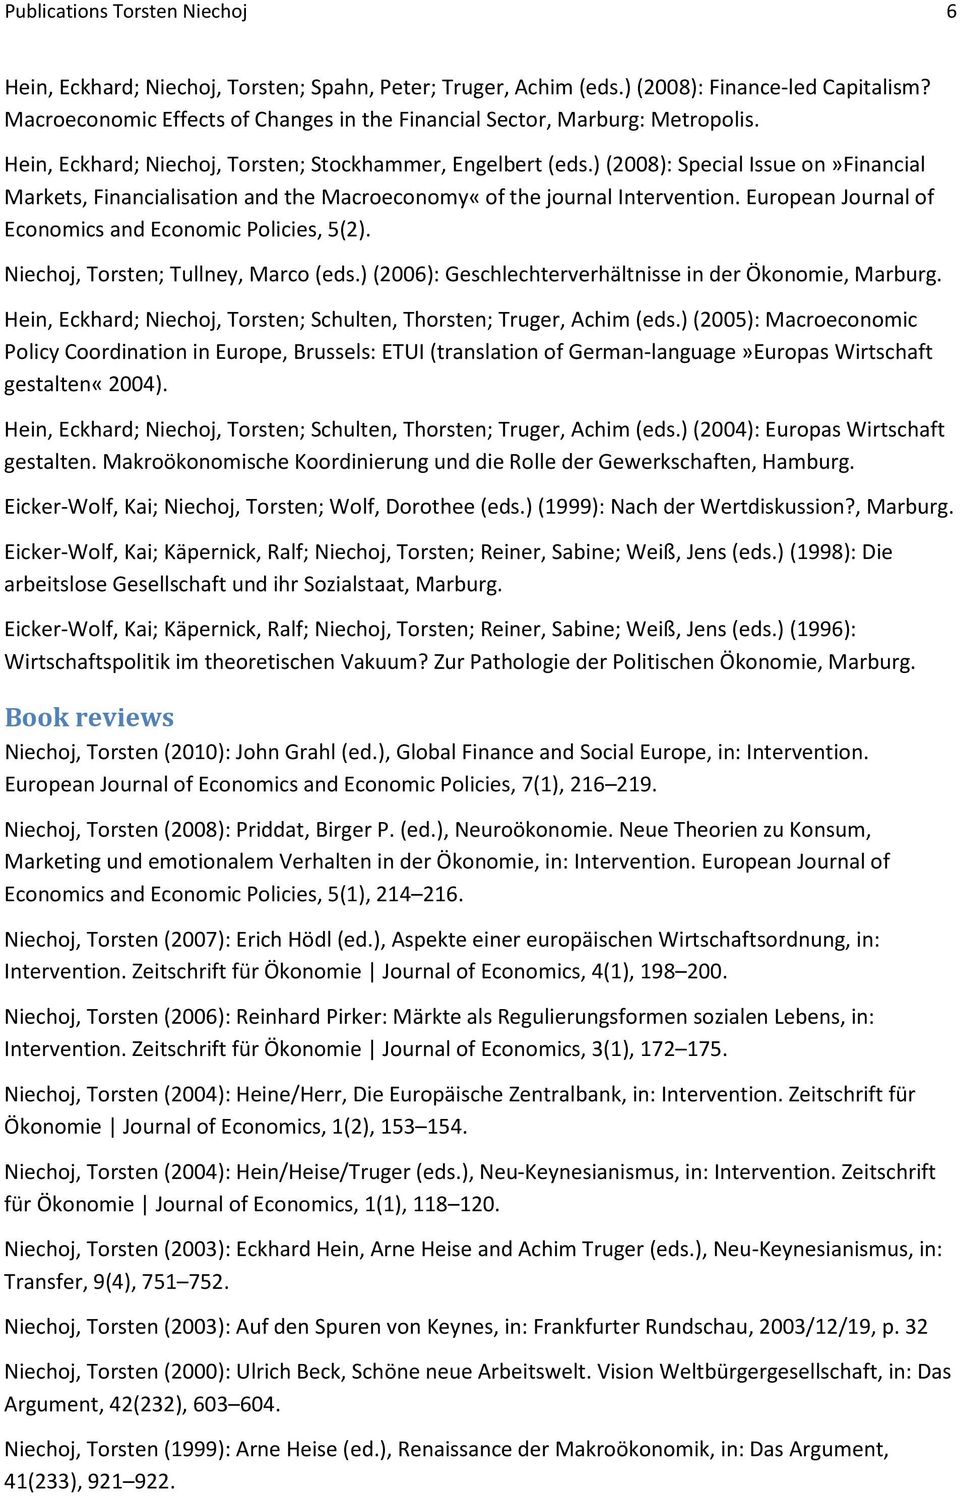 ) (2008): Special Issue on»financial Markets, Financialisation and the Macroeconomy«of the journal Intervention. European Journal of Economics and Economic Policies, 5(2).